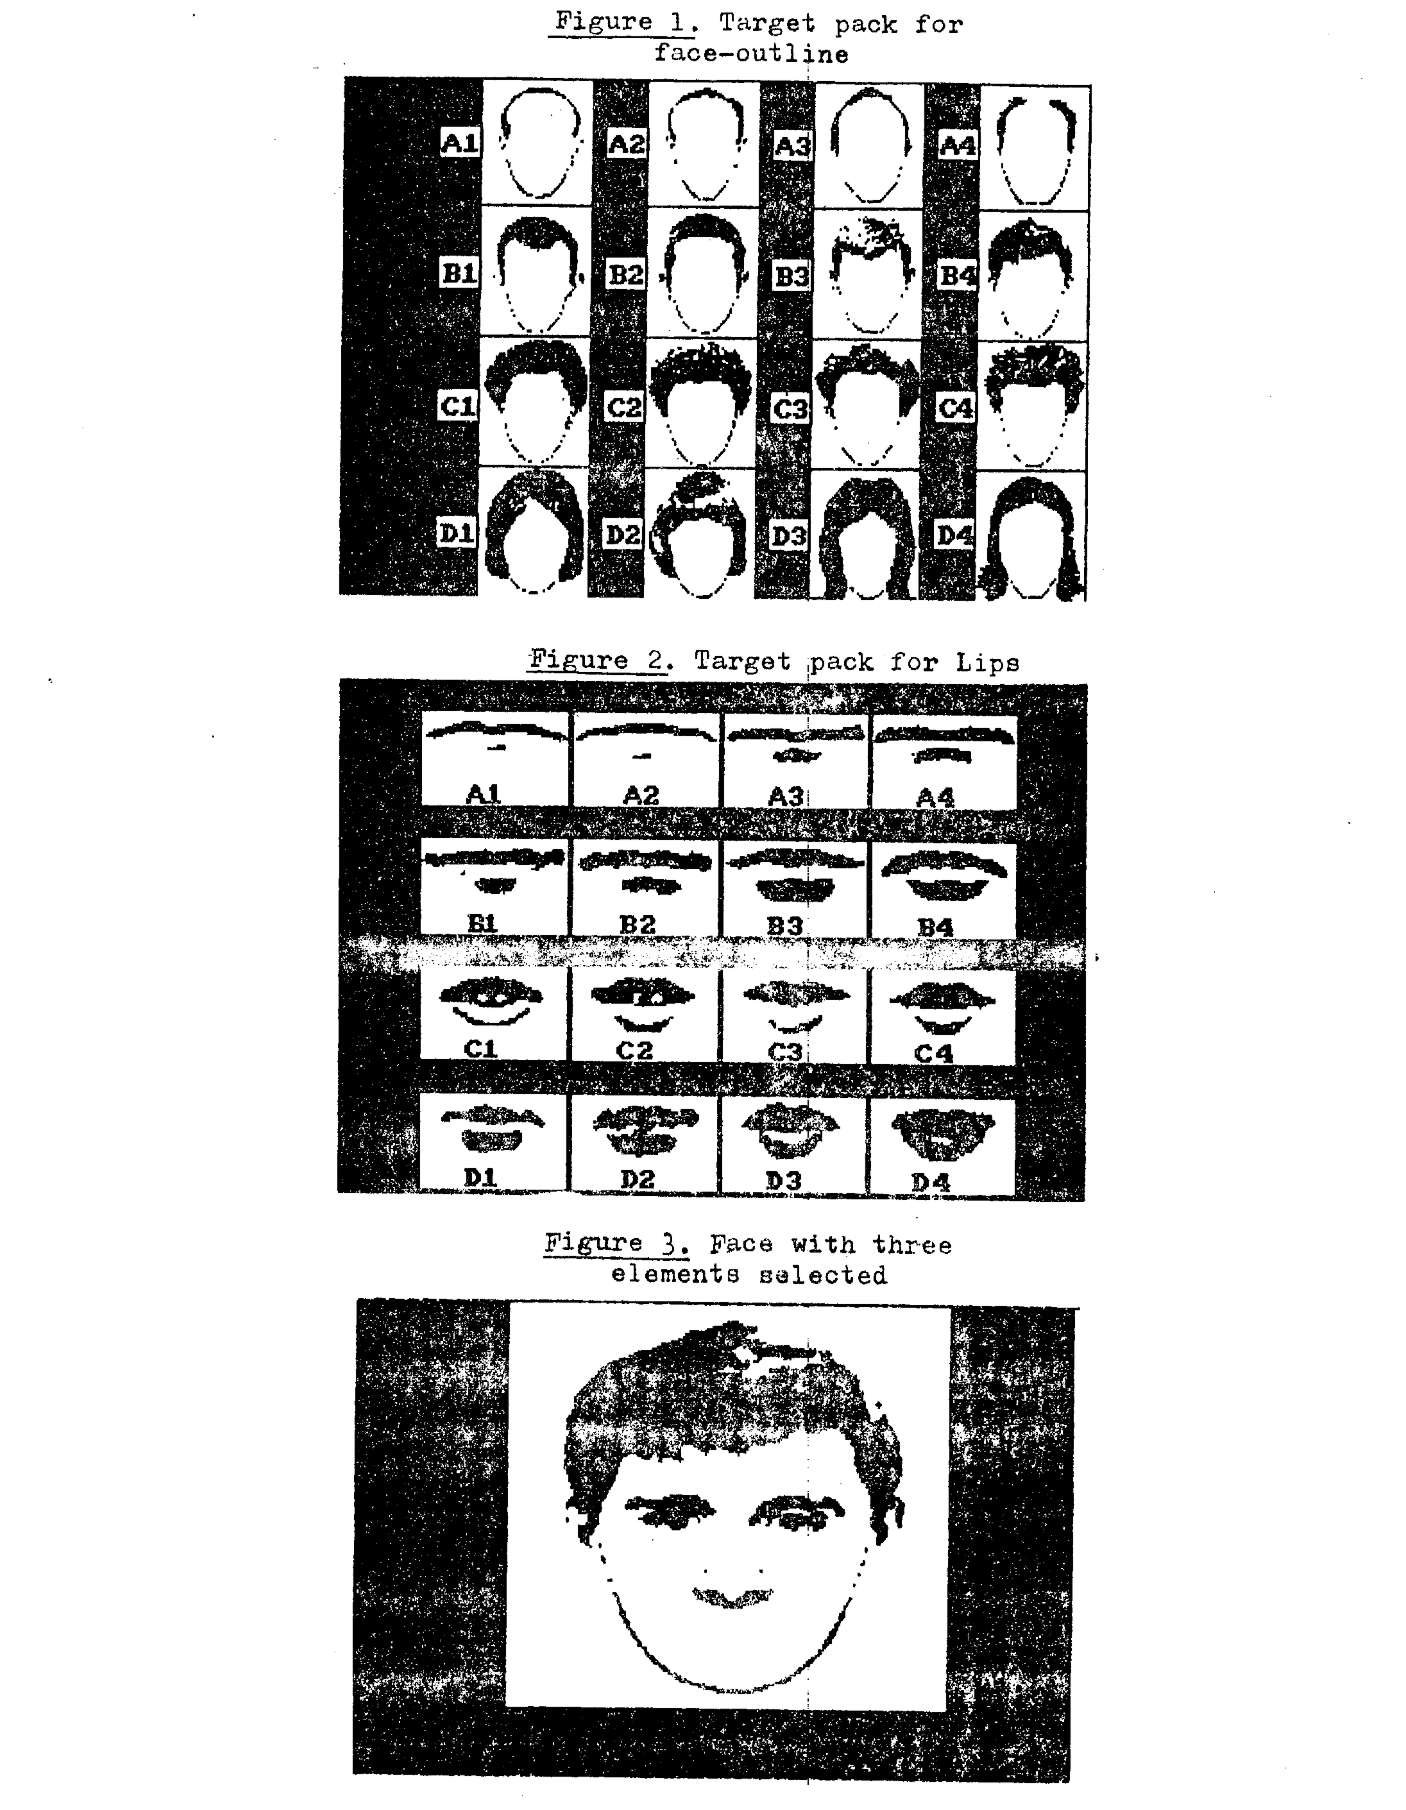 faces in black and white from scanned copy of stargate program work